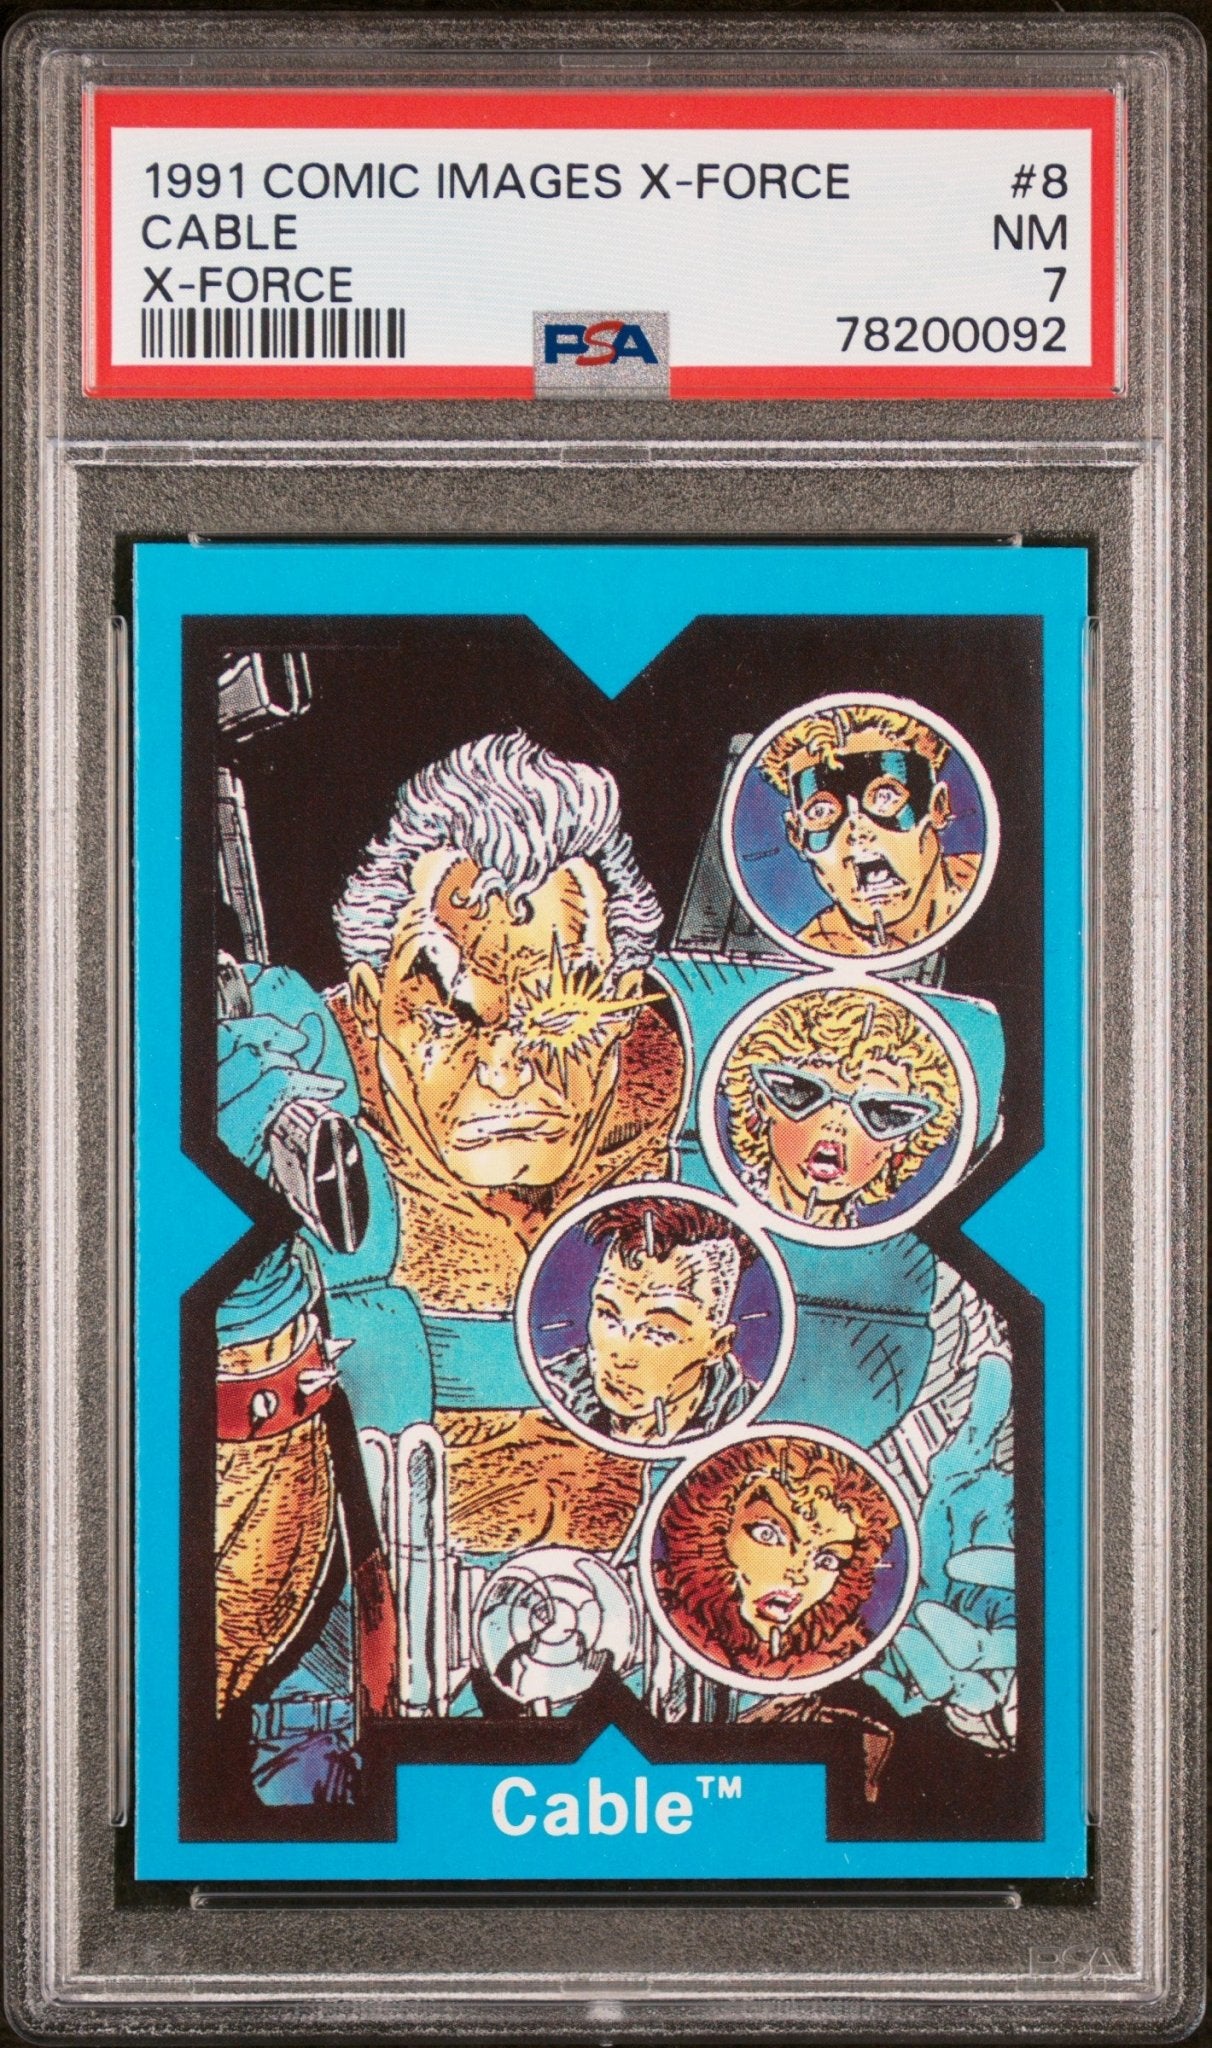 CABLE PSA 7 1991 Comic Images Marvel X-Force #8 Marvel Base Graded Cards - Hobby Gems